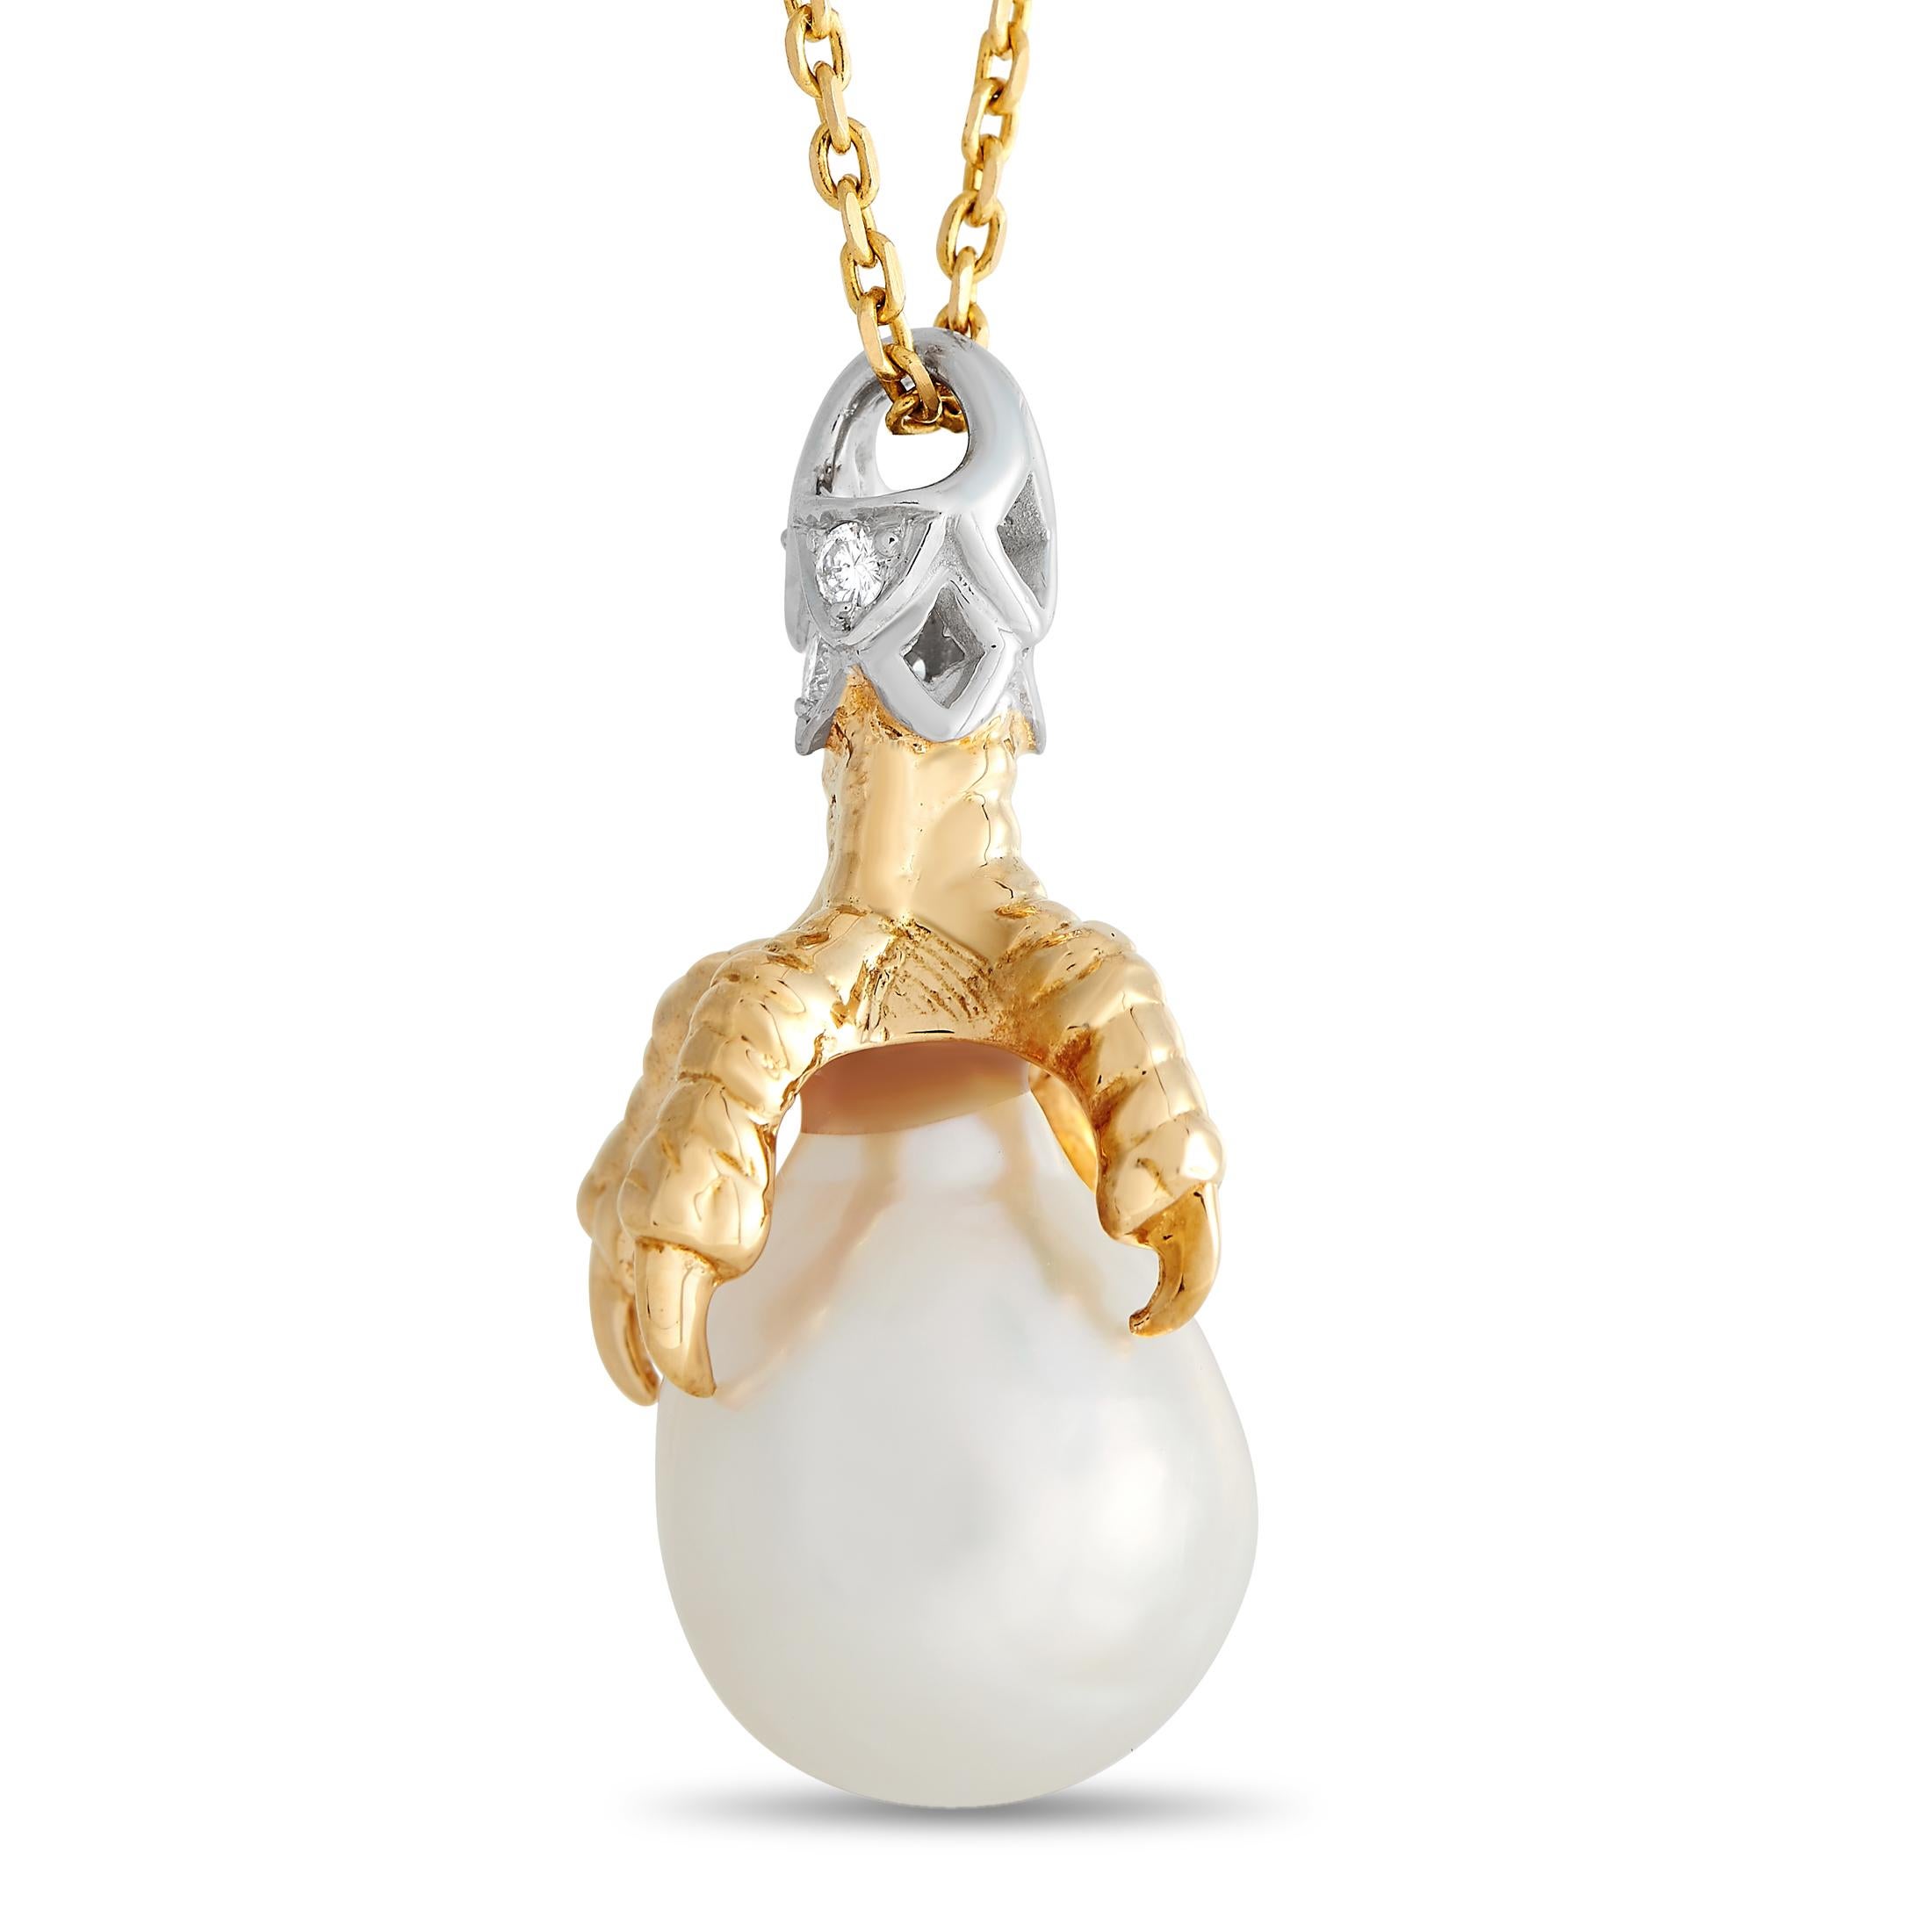 This beautiful and meaningful two-toned necklace from Carrera y Carrera is perfect for someone whose spirit animal is the eagle. The necklace has a yellow gold chain holding a white gold bail connected to an 18K yellow gold setting sculpted like an